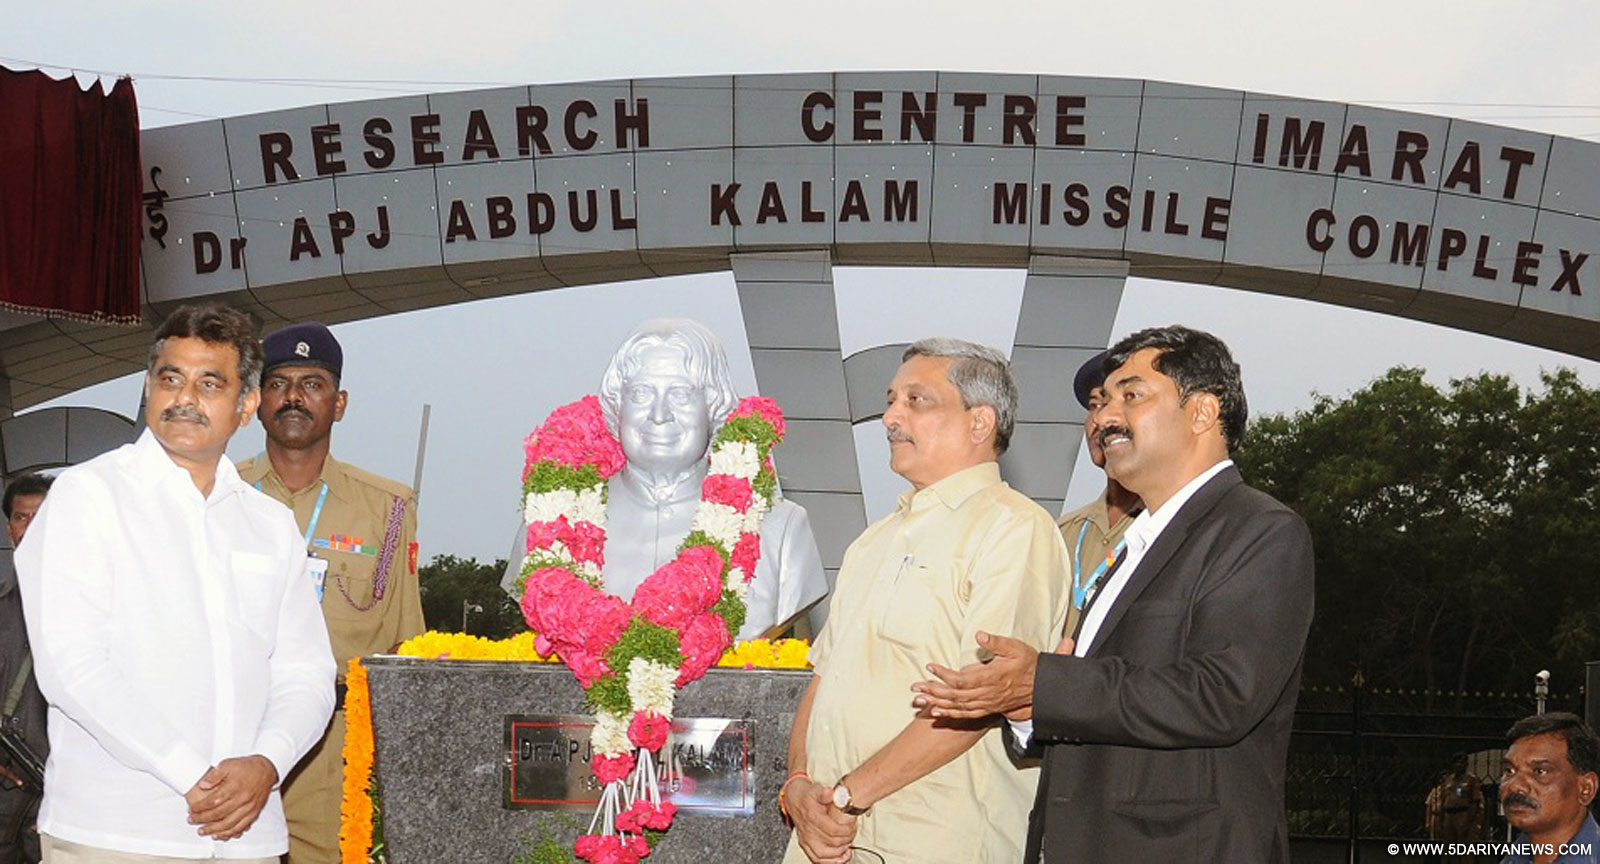 The Union Minister for Defence, Shri Manohar Parrikar renaming Missile Complex after Dr. A.P.J. Abdul Kalam, at Research Centre Imarat (RCI), Hyderabad on October 15, 2015. The MP of Chevella, Telangana State, Shri K. Vishweshwar Reddy, and the Scientific Adviser to Raksha Mantri, Dr. G. Satheesh Reddy are also seen.